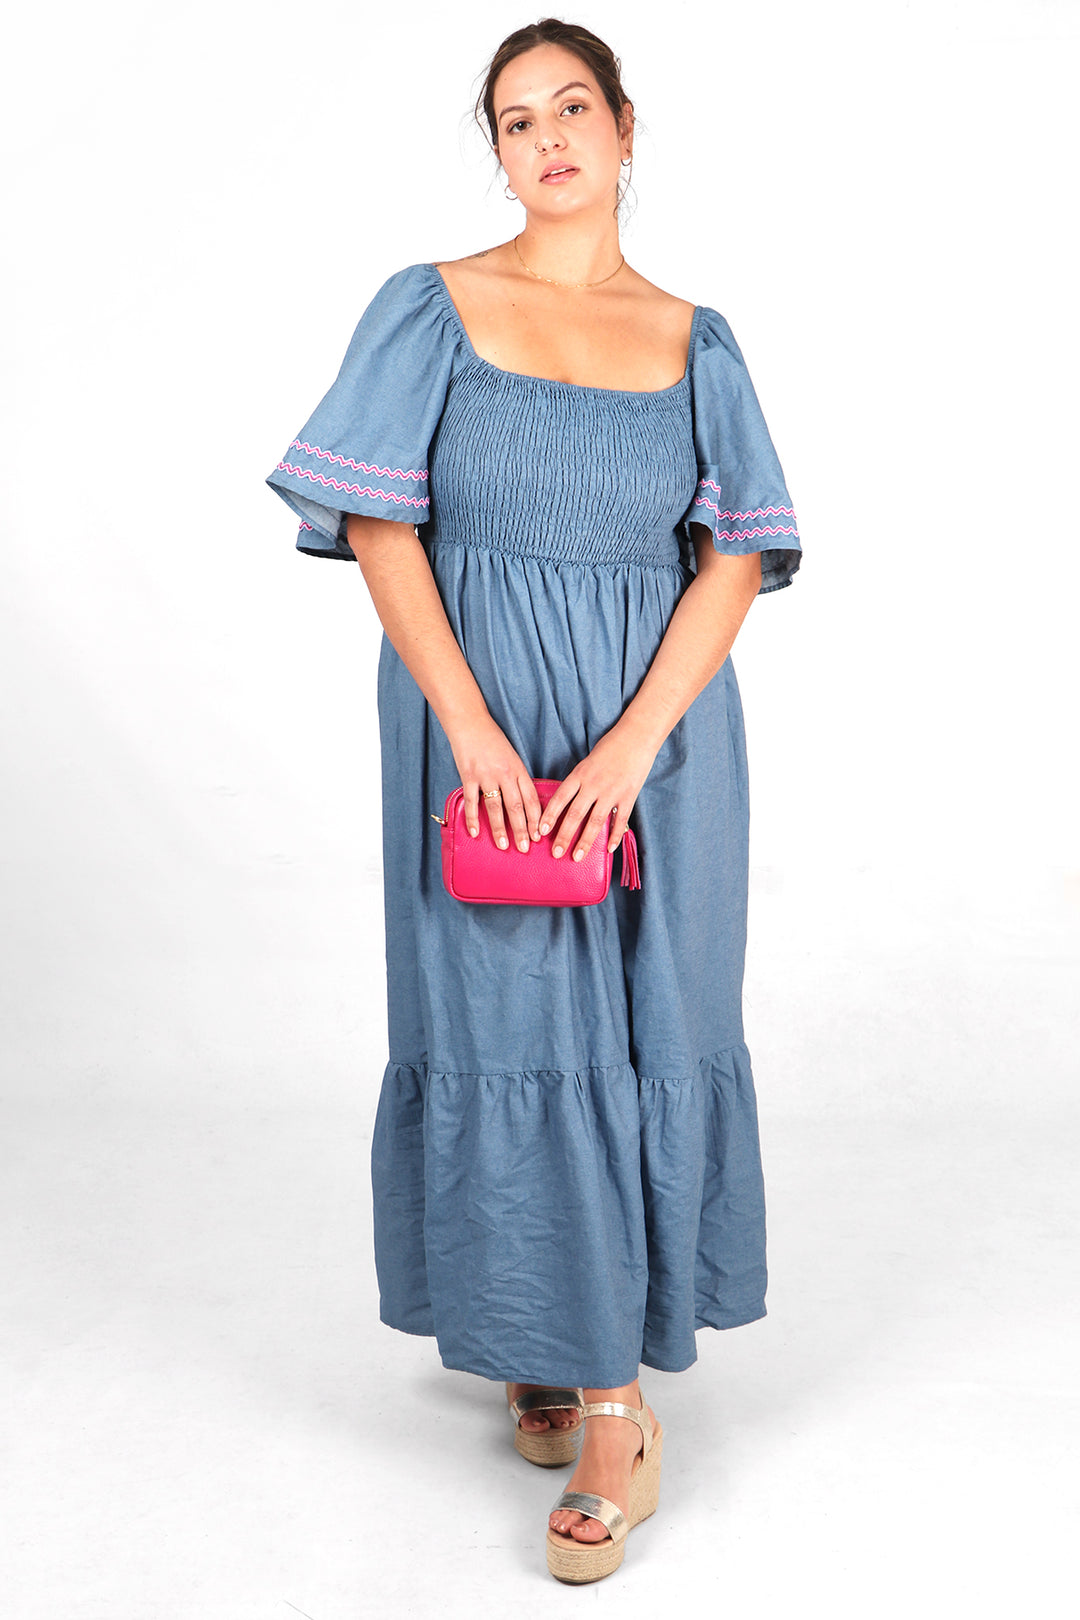 model wearing a denim blue maxi milkmaid dress with shirred bodice and bell sleeves, the sleeves have pink zig zag embroidered stripes around the cuffs